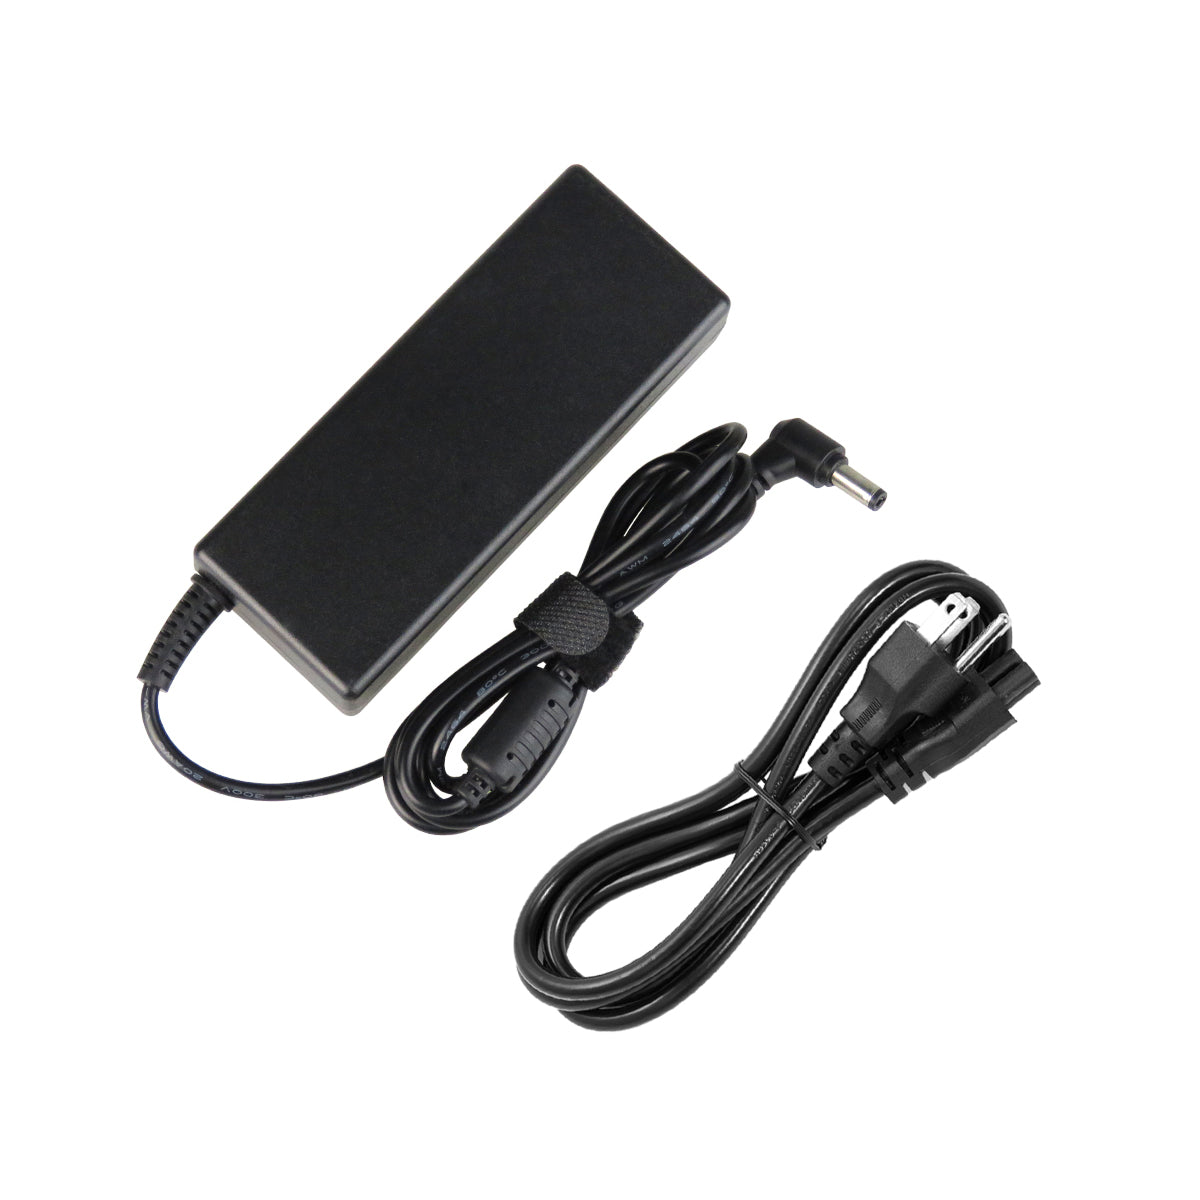 AC Adapter Charger for ASUS X54C-RB31 Notebook.